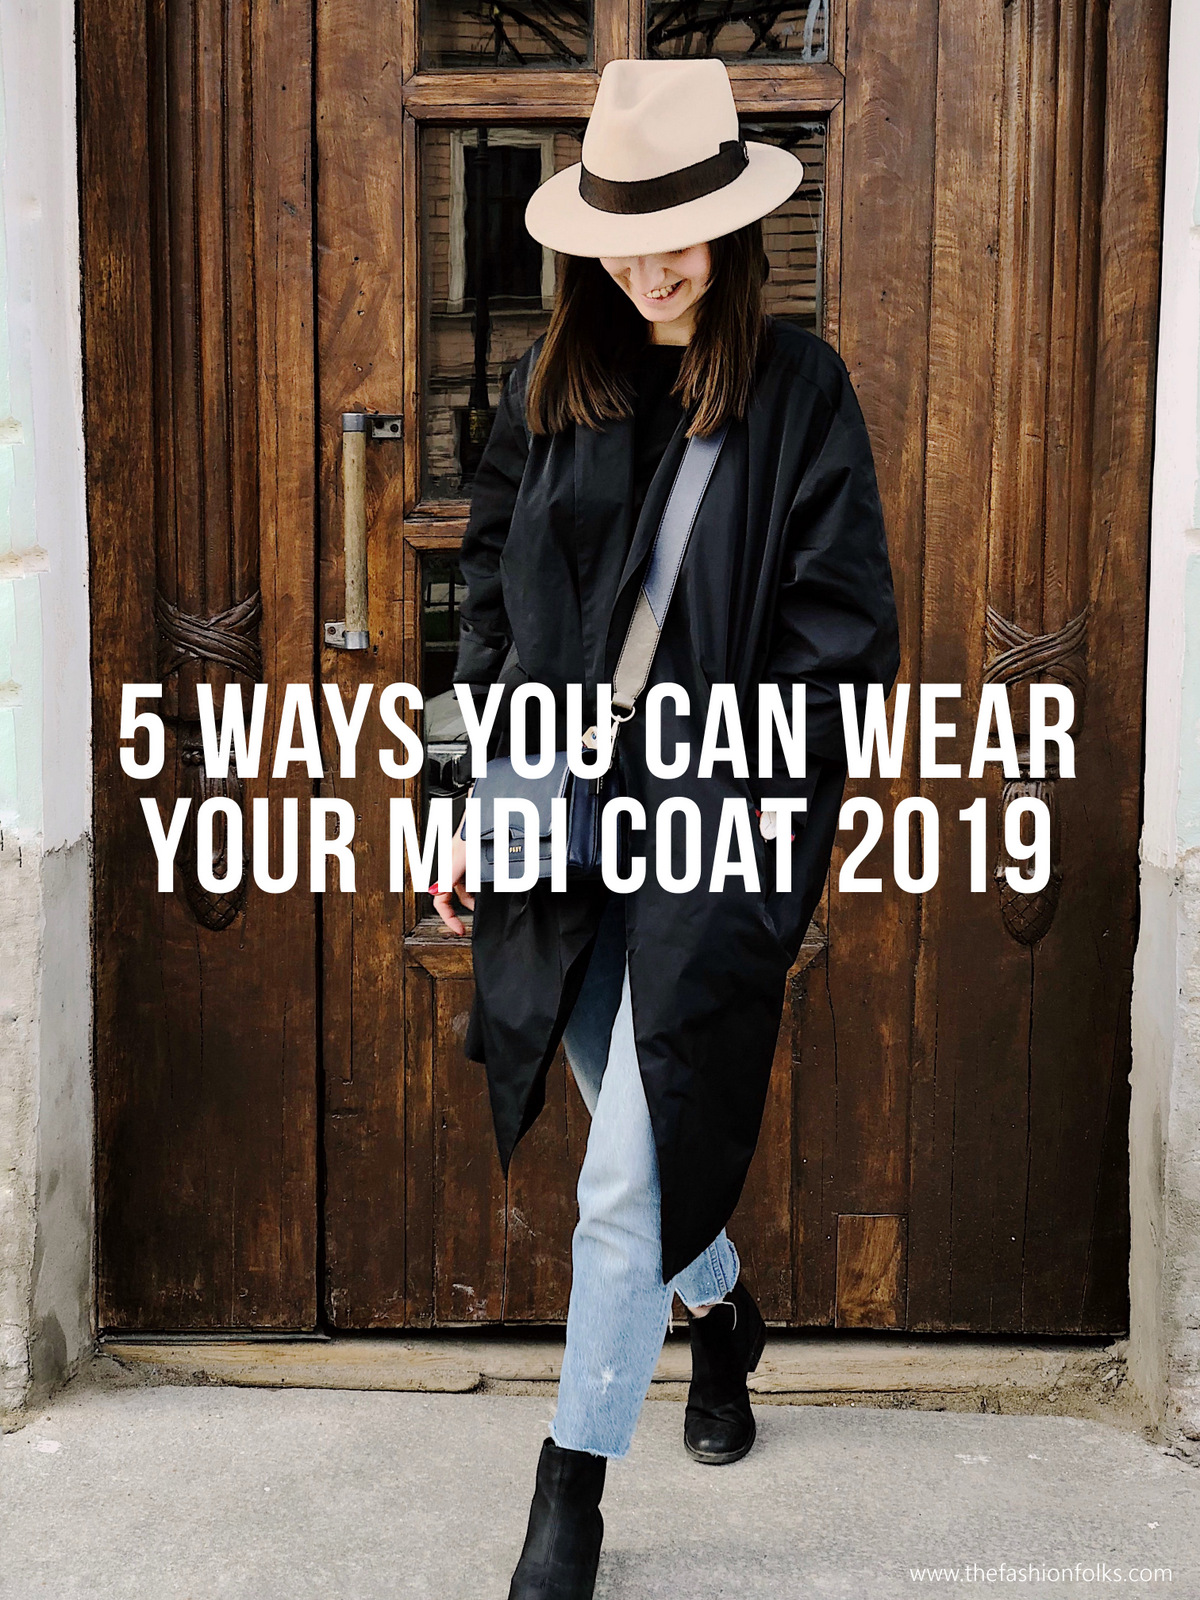 5 Ways You Can Wear Your Midi Coat 2019